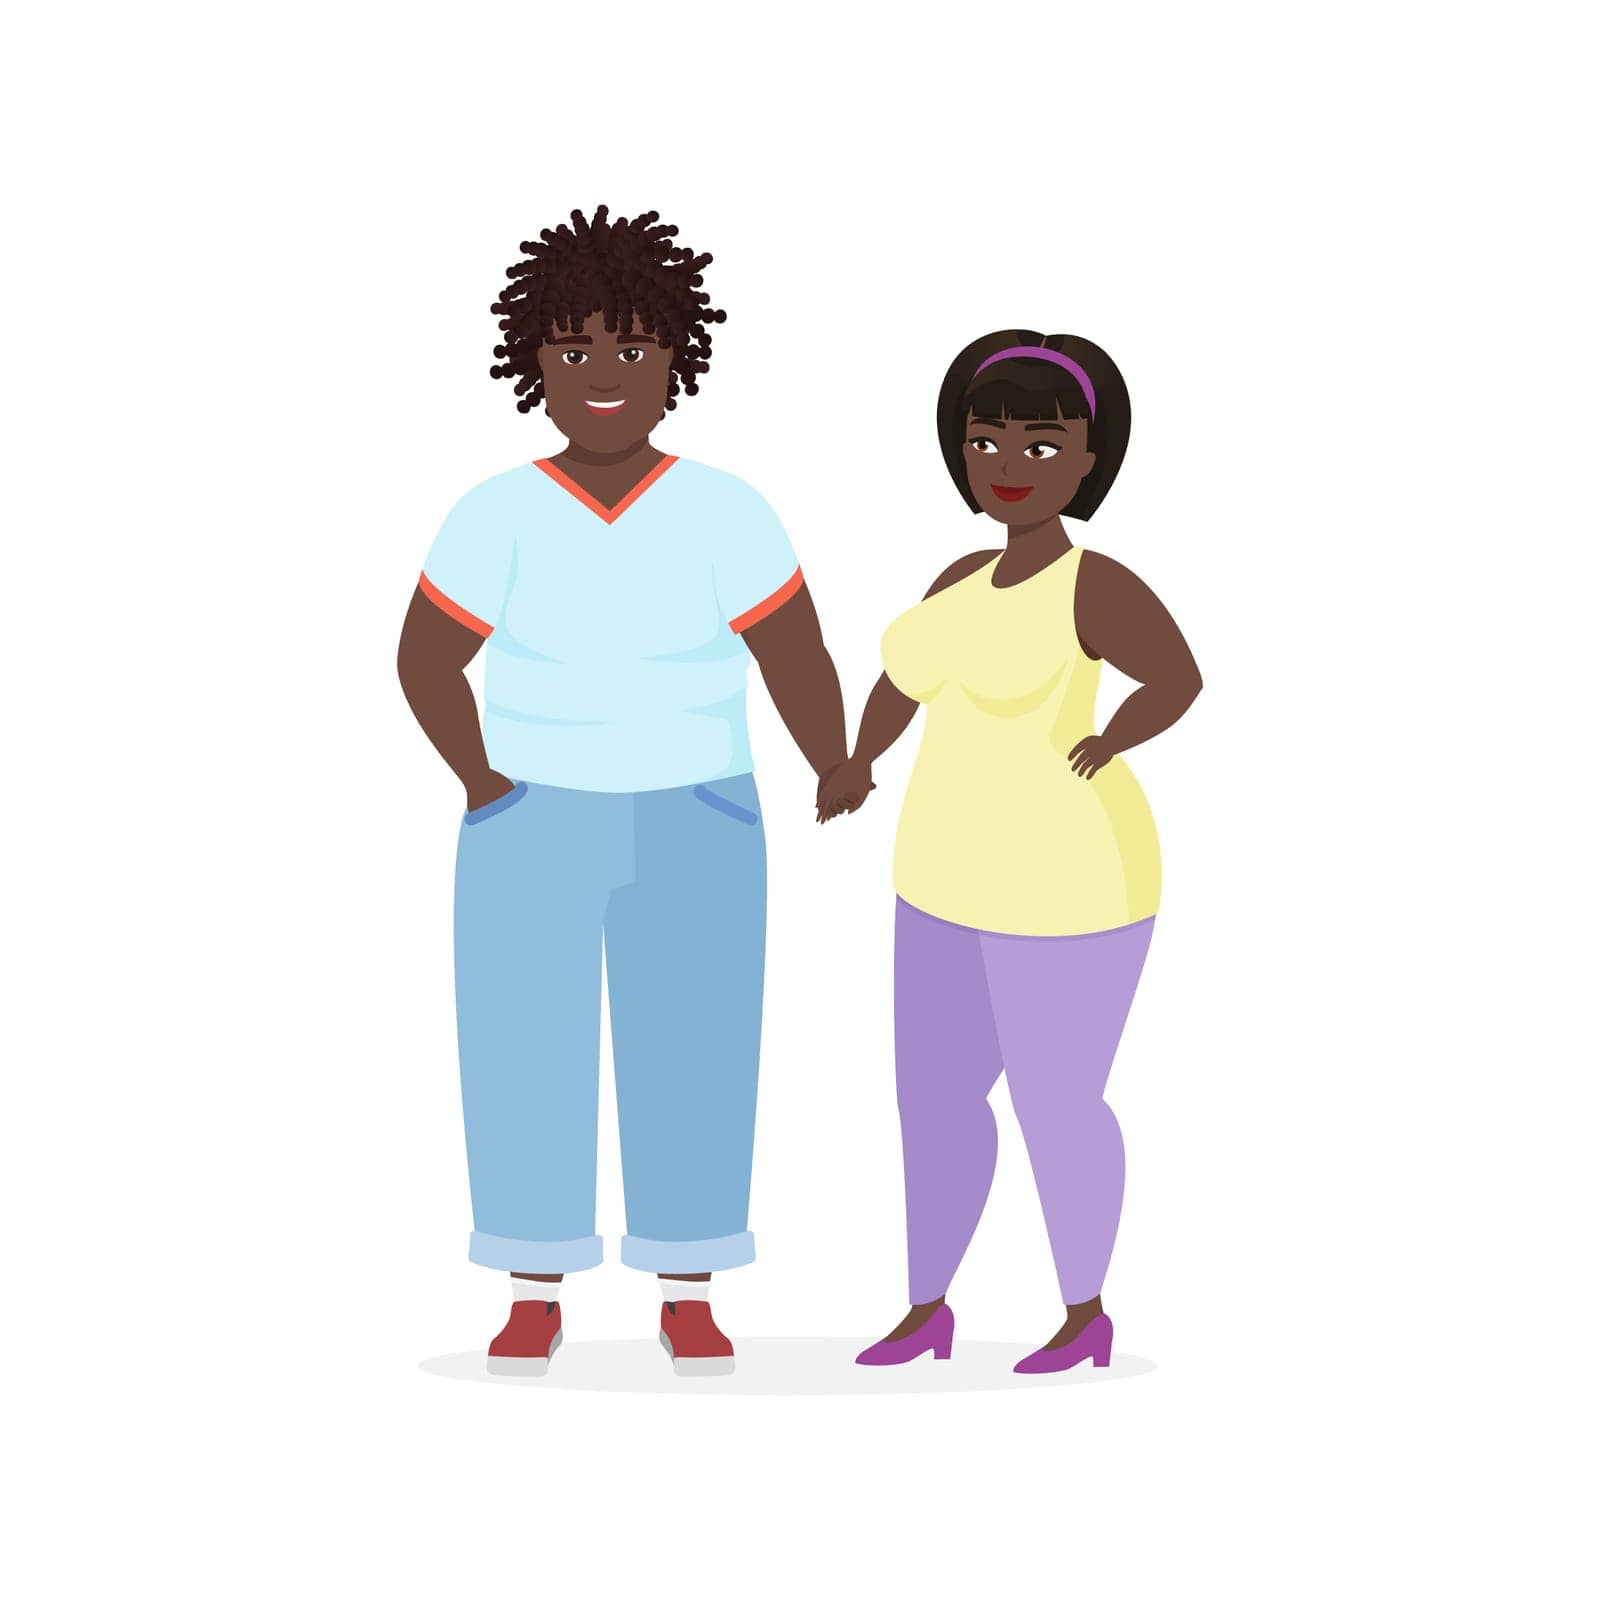 Young guy with afro haircut holding girls hand, couple standing together vector illustration